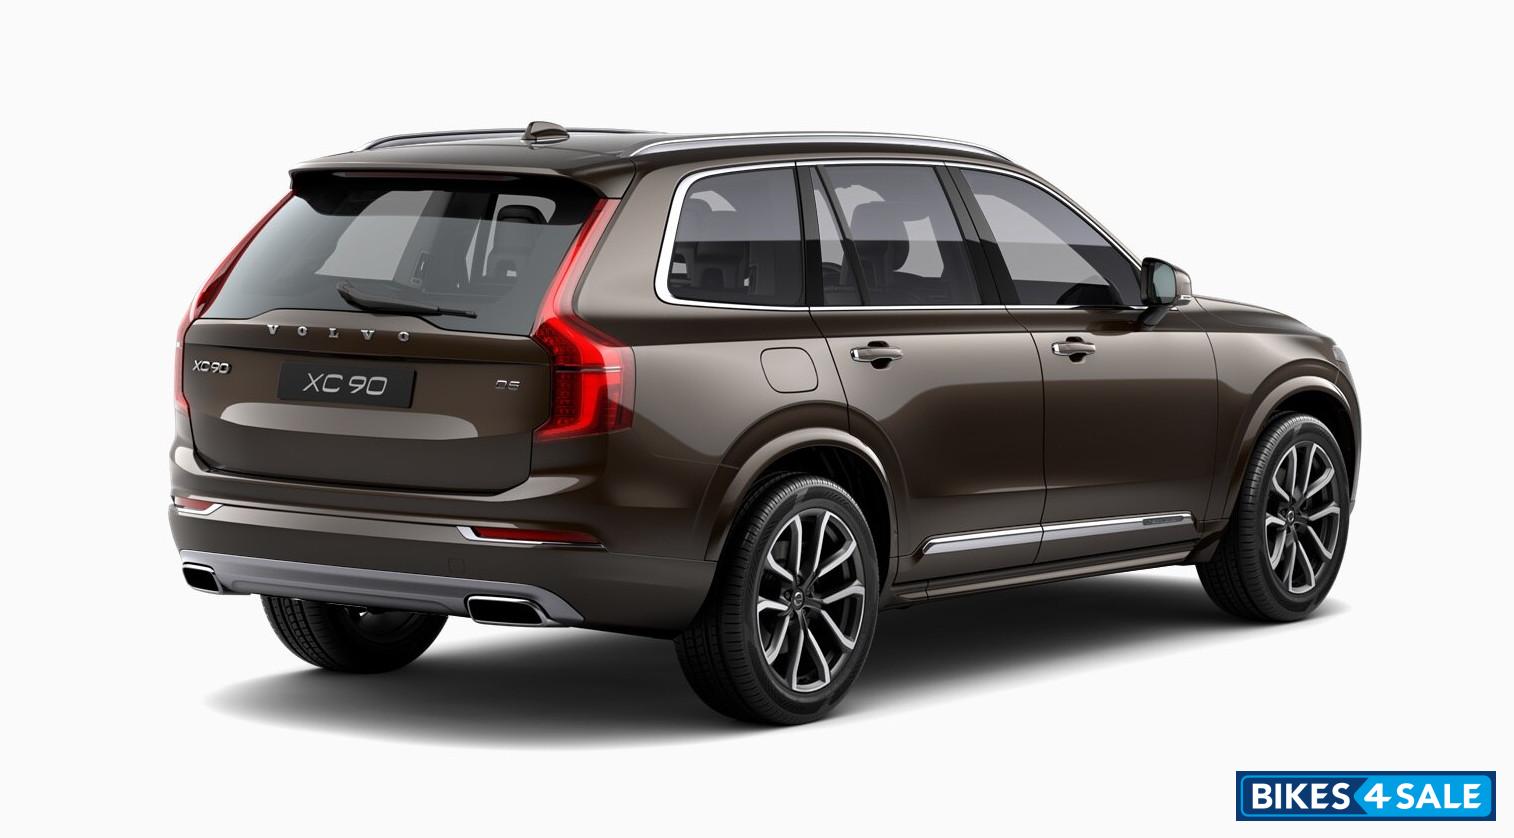 Volvo XC90 D5 Inscription Diesel AT - Side View